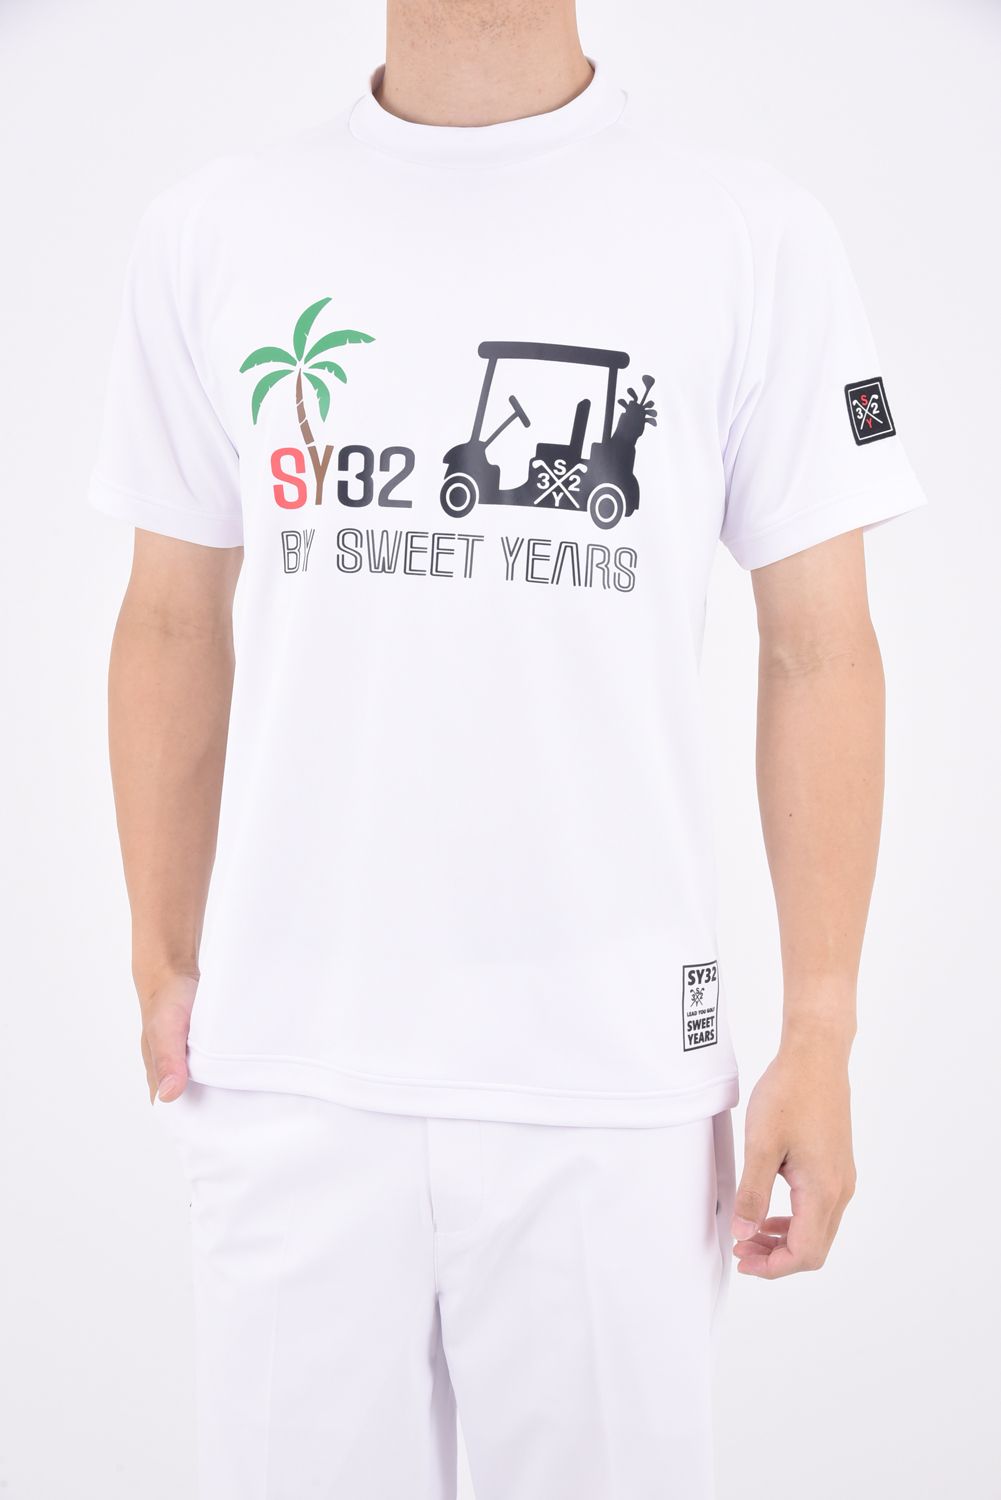 SY32 by SWEET YEARS GOLF - SYG CART SURF PT MOCK SHIRTS